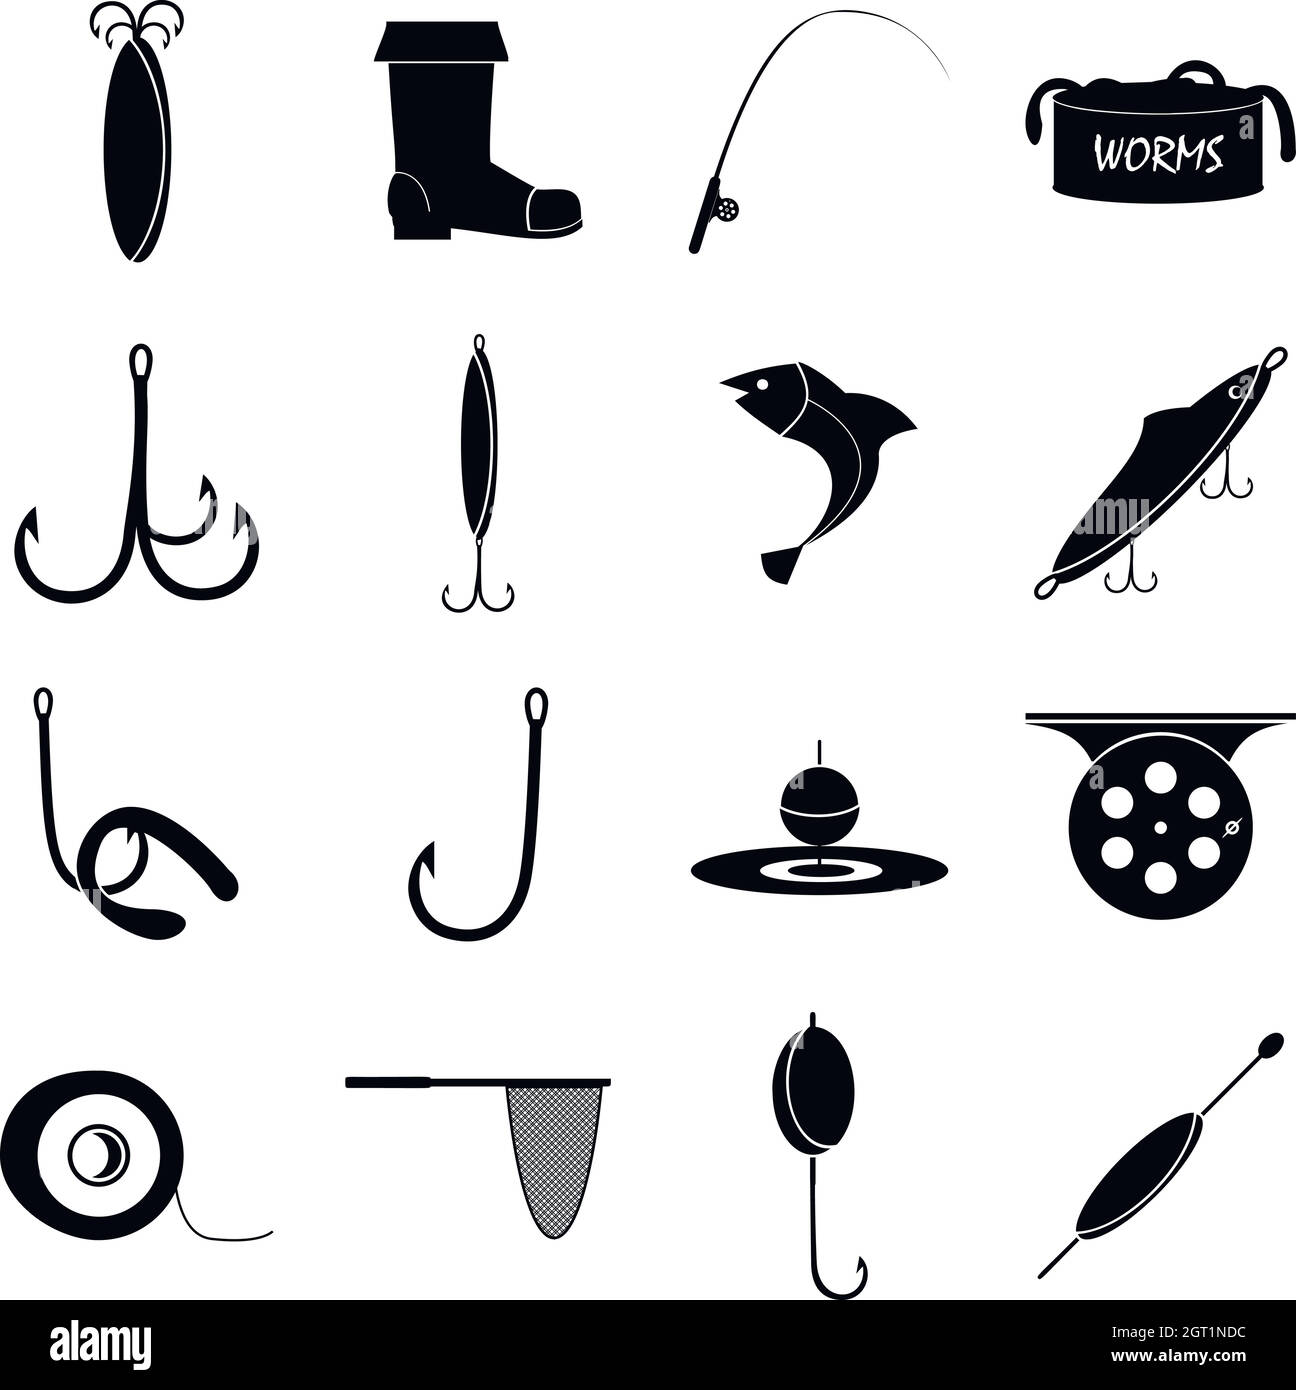 Fishing items Stock Vector Images - Alamy